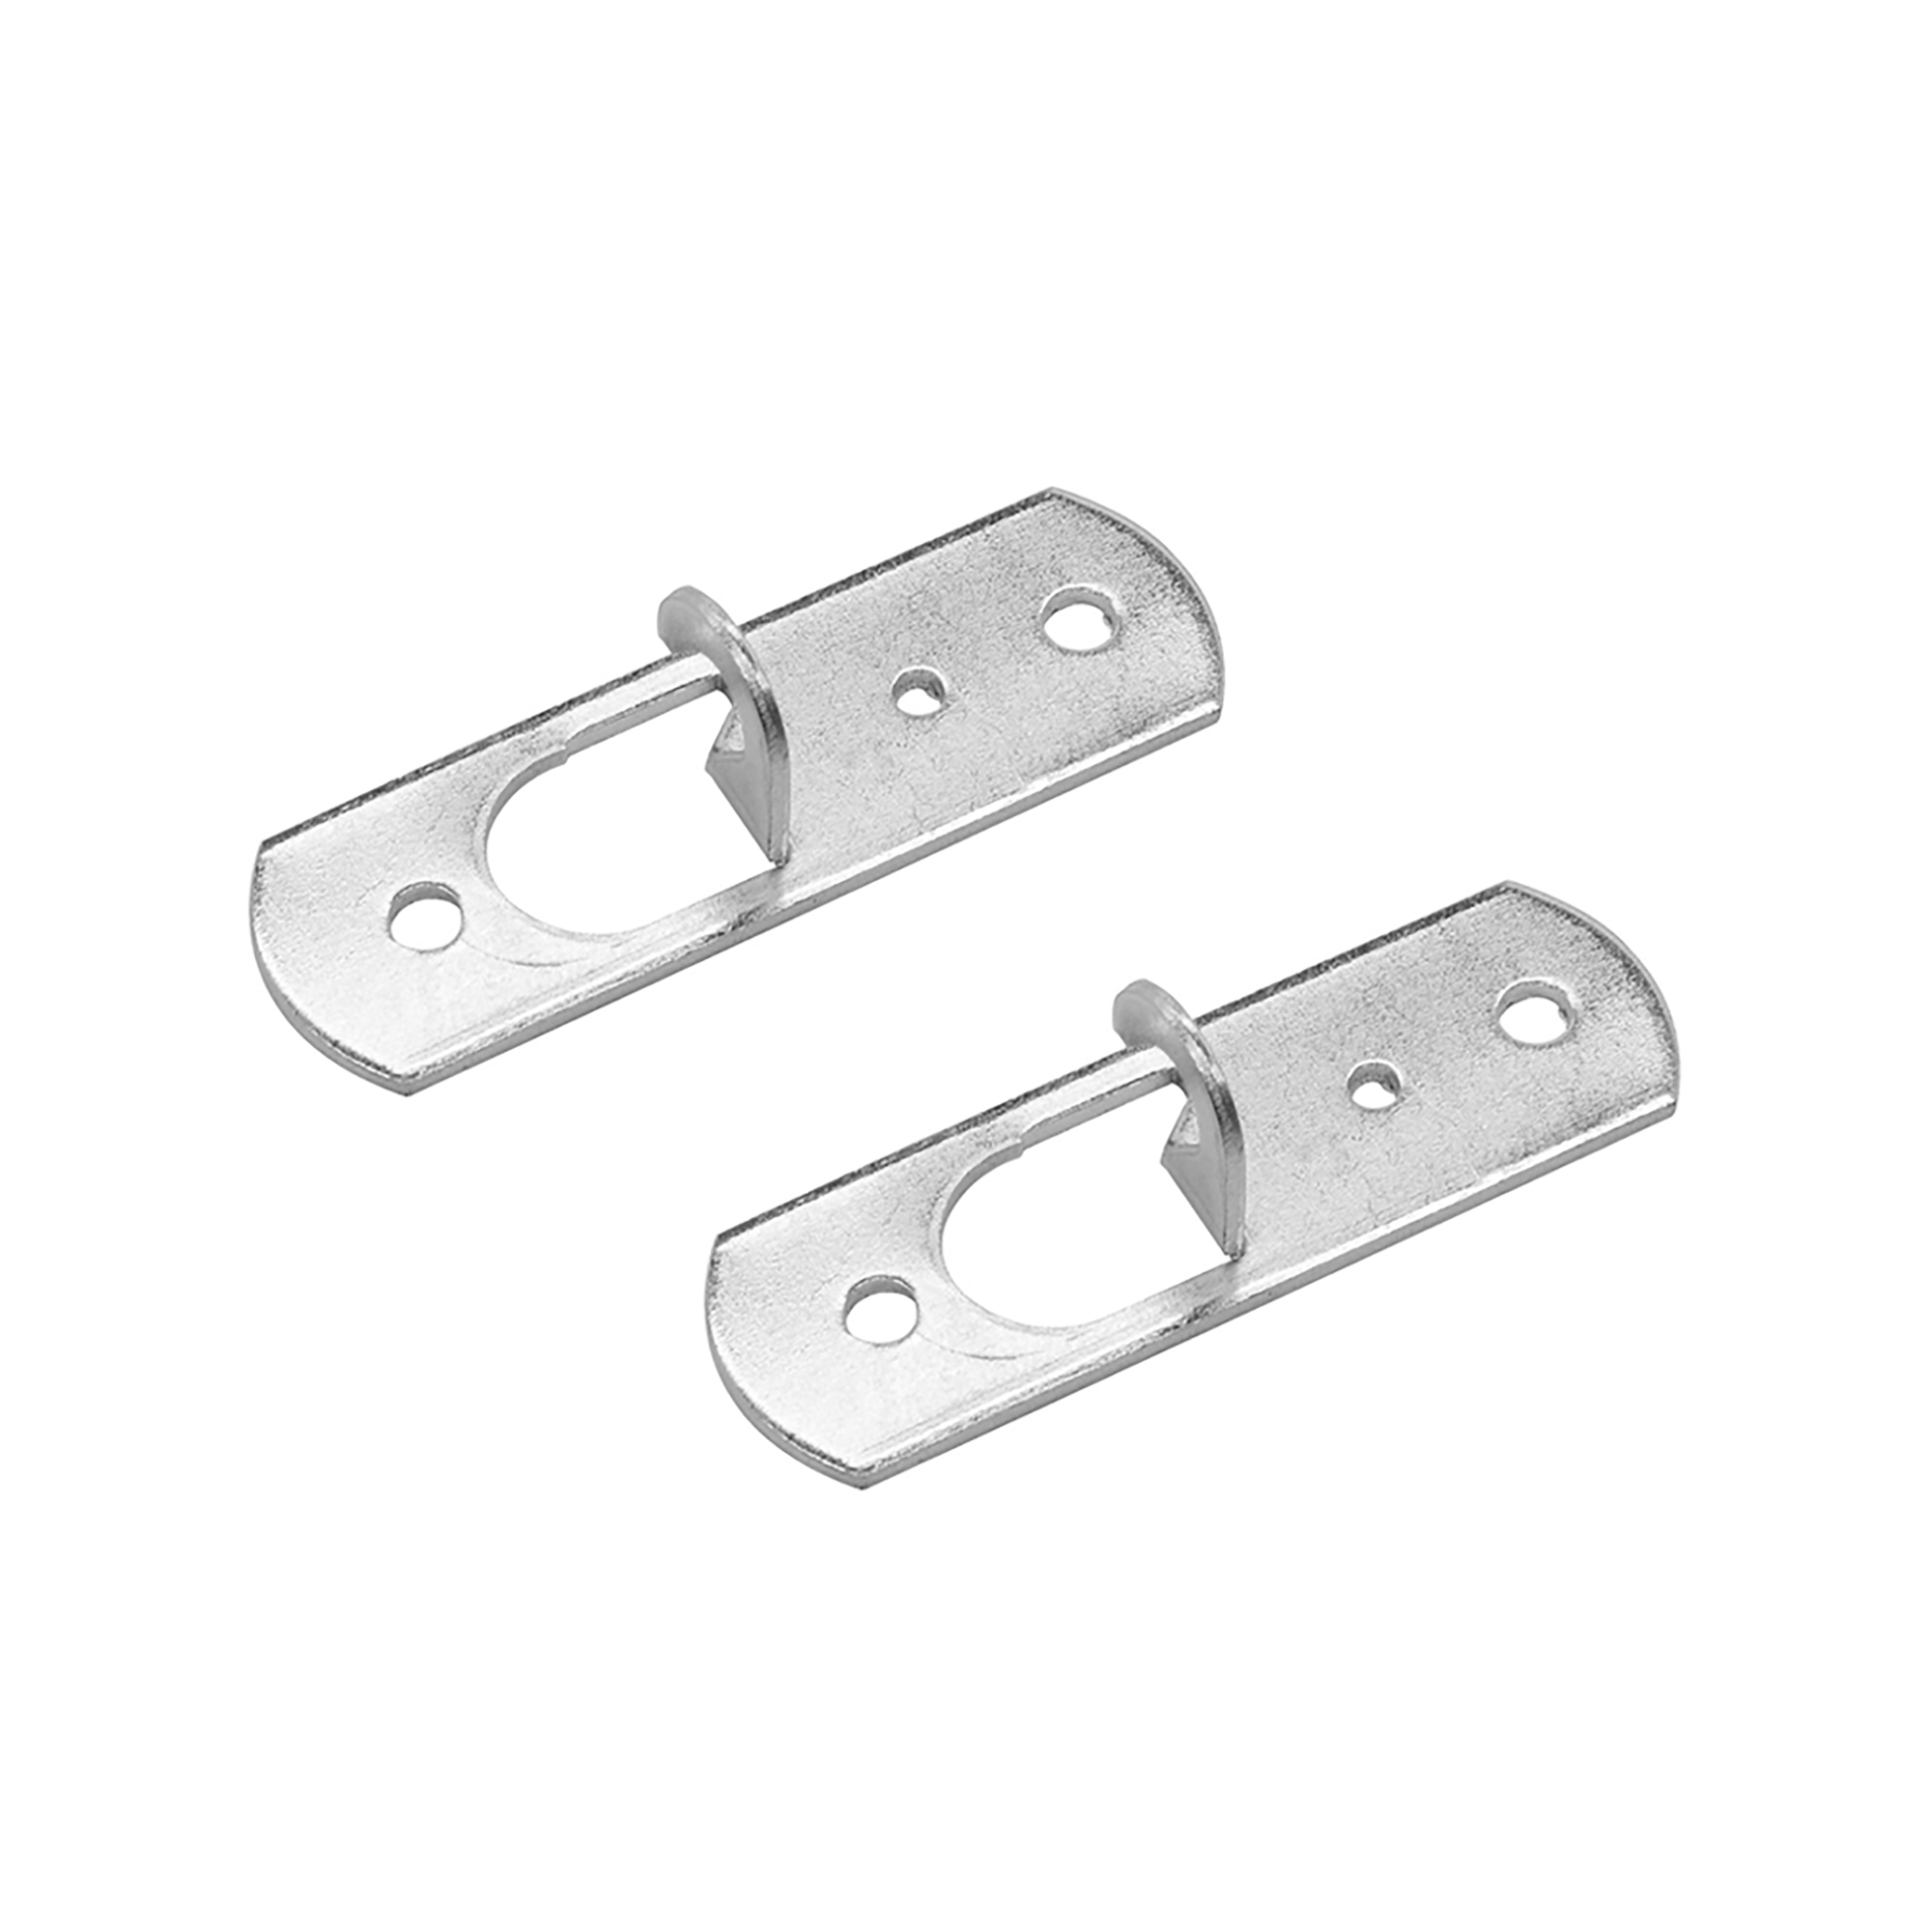 D0052  Additions Universal Ceiling Flat Hook Plate (2 Pack) Galvanized